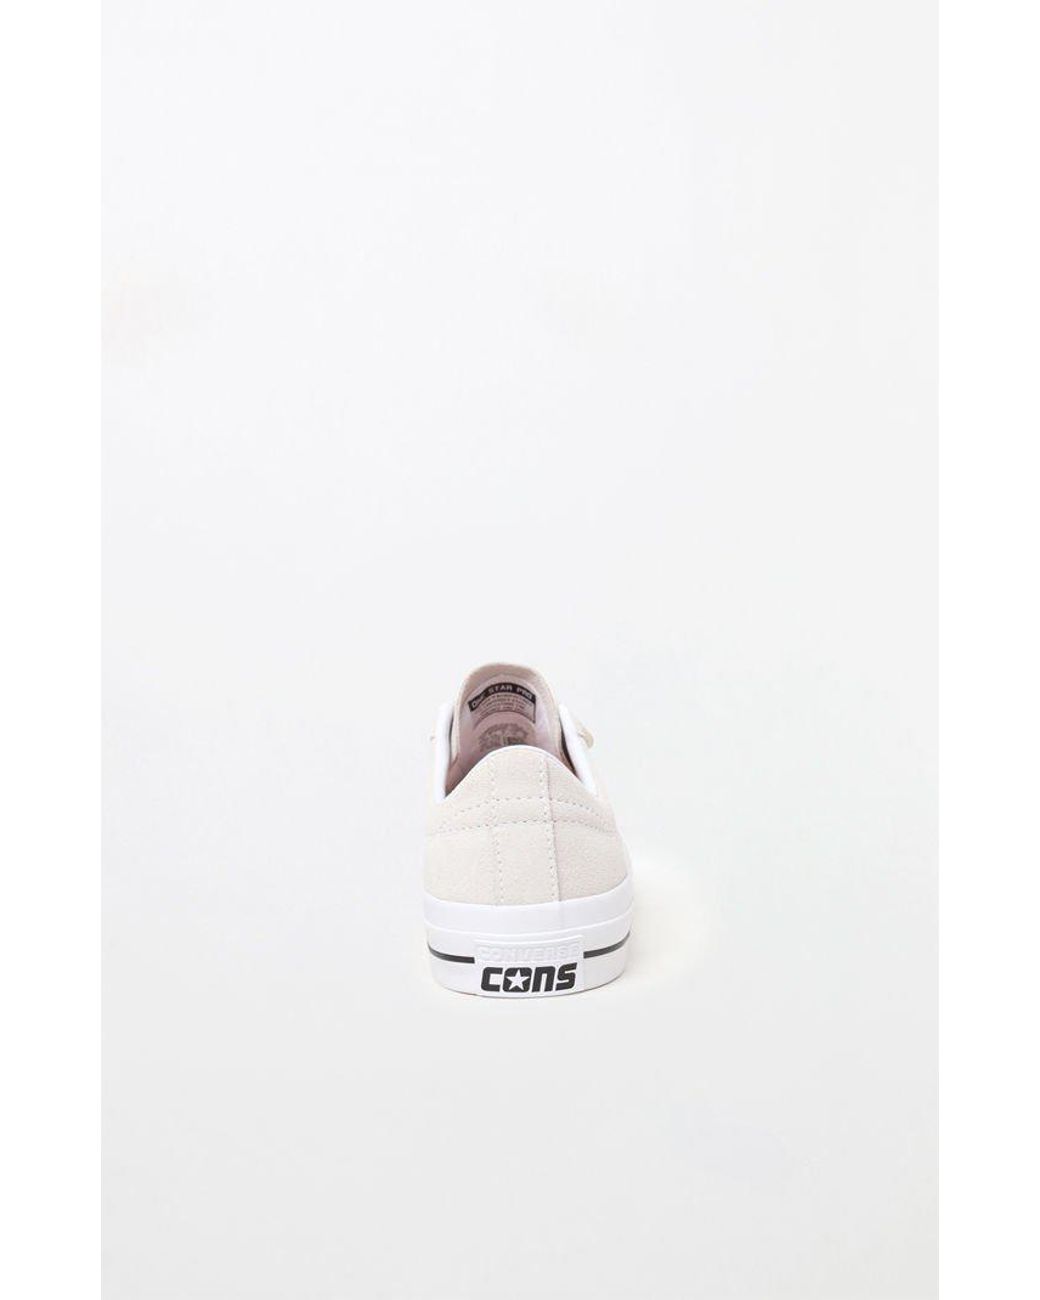 Converse One Star Pro 3v Suede Low Top White Shoes for Men | Lyst